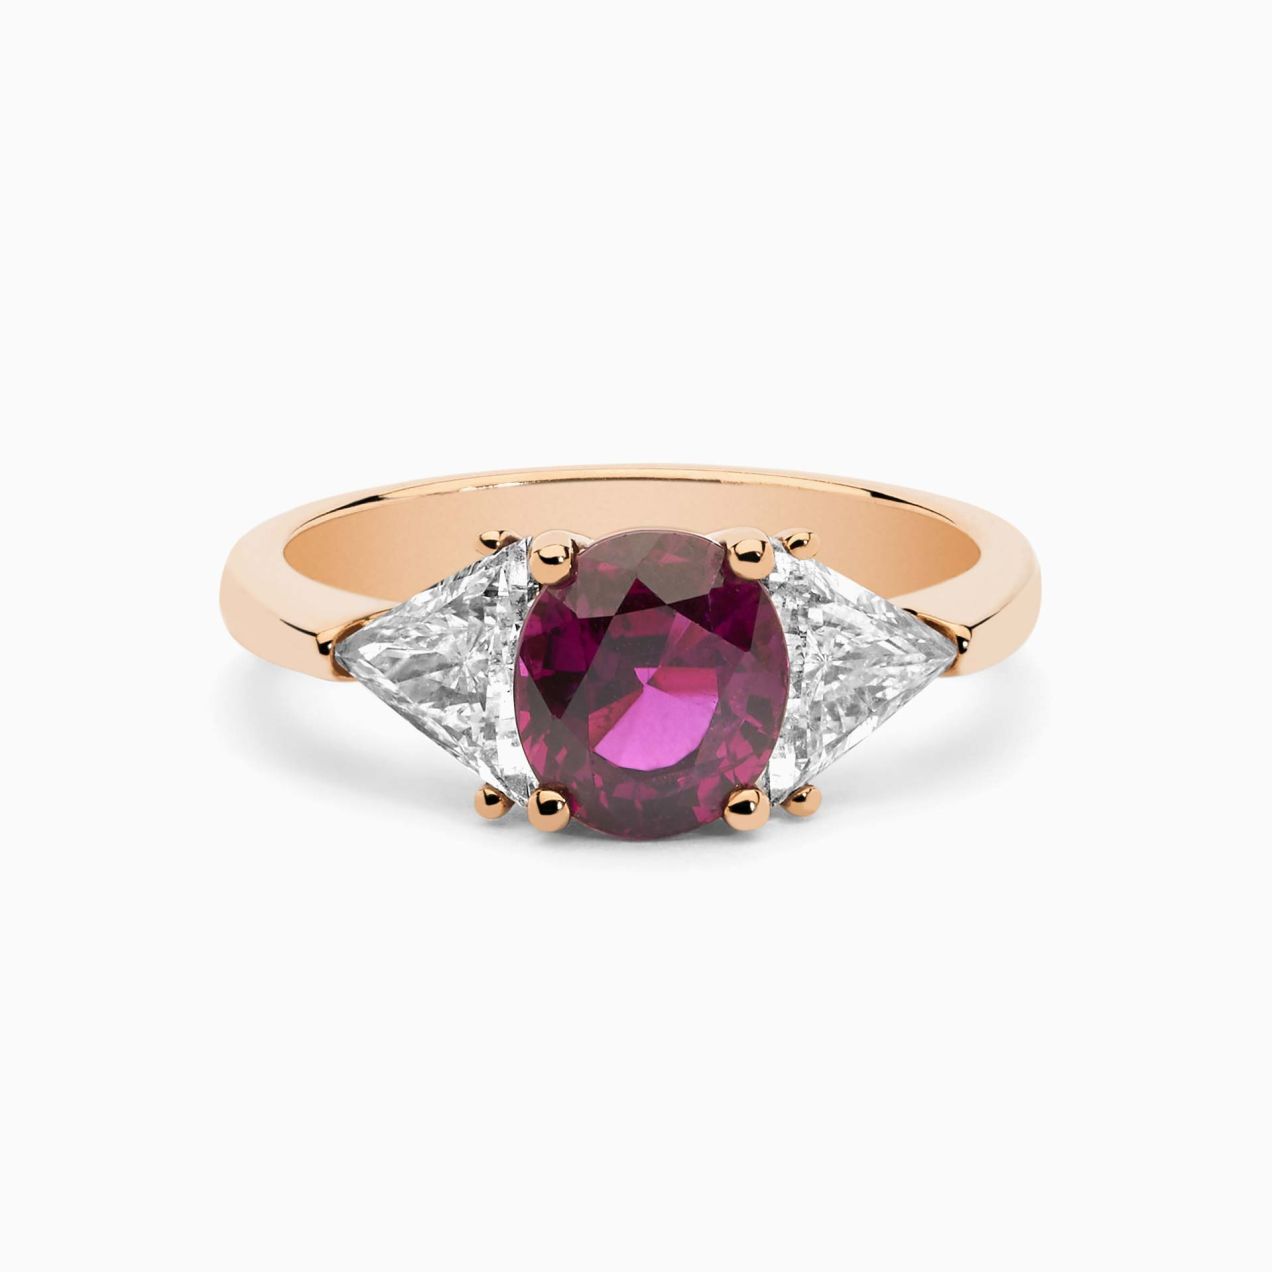 Rose gold with ruby in the center solitaire ring